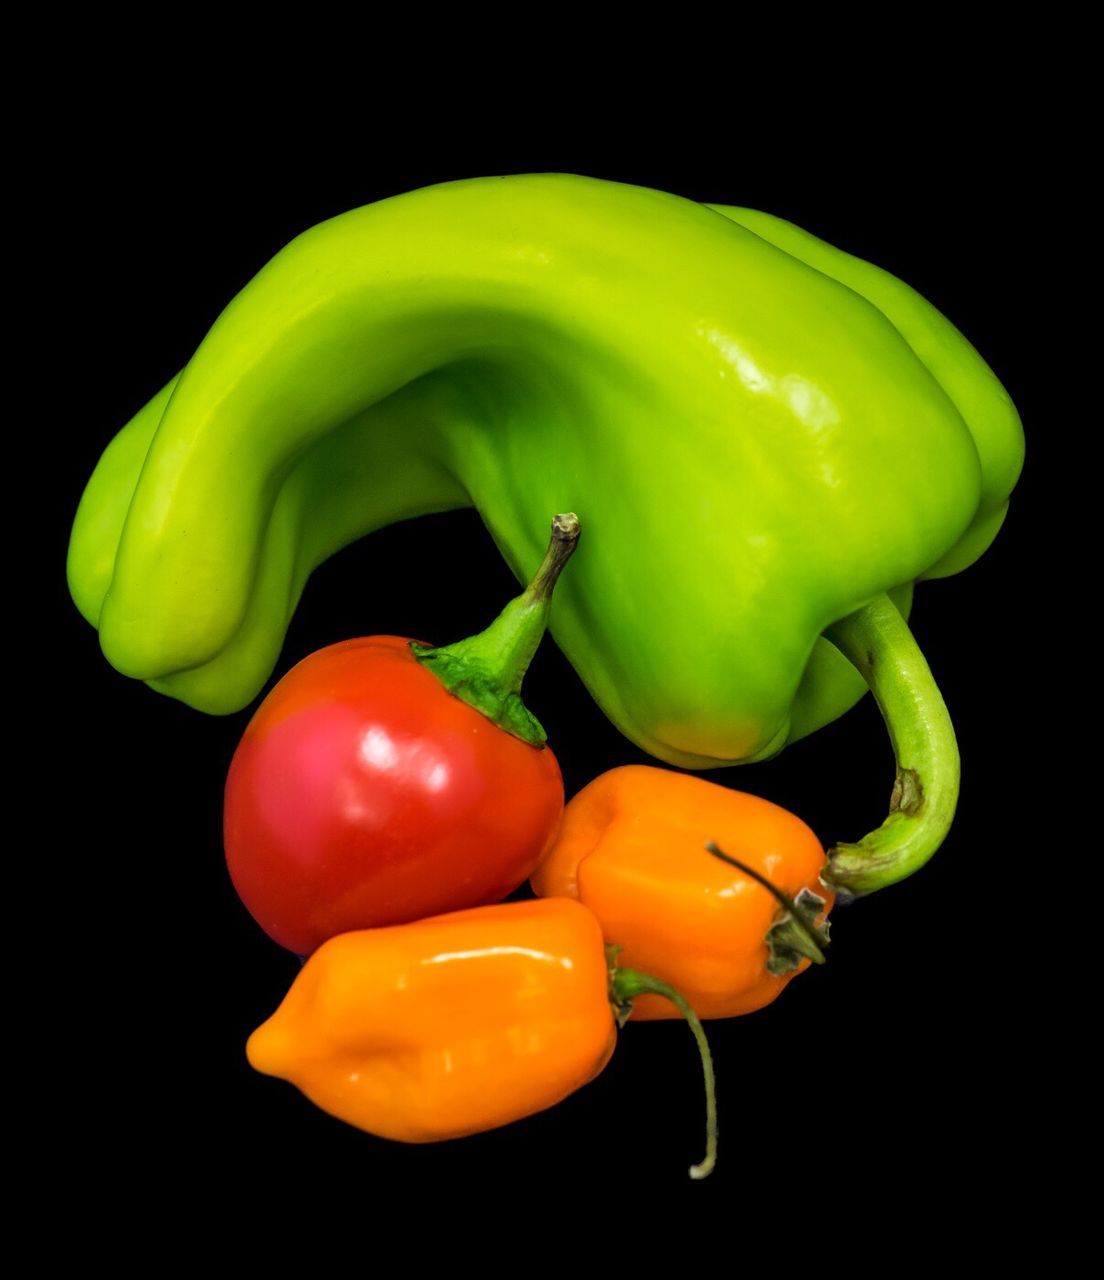 CLOSE-UP OF BELL PEPPER AGAINST BLACK BACKGROUND